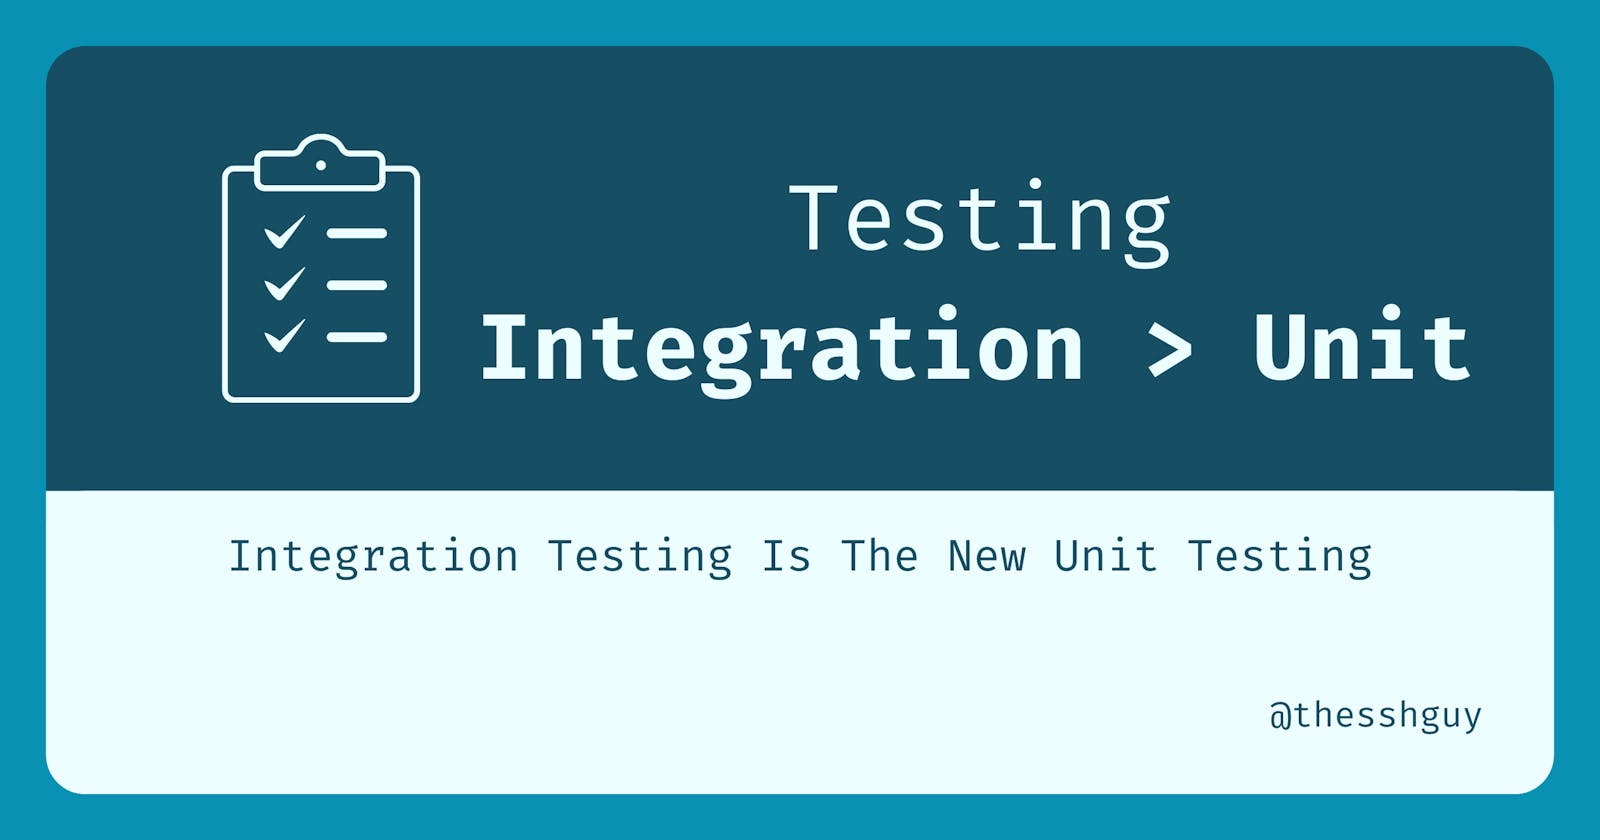 Integration Testing Is The New Unit Testing: How To Ship Reliable Code In Less Time